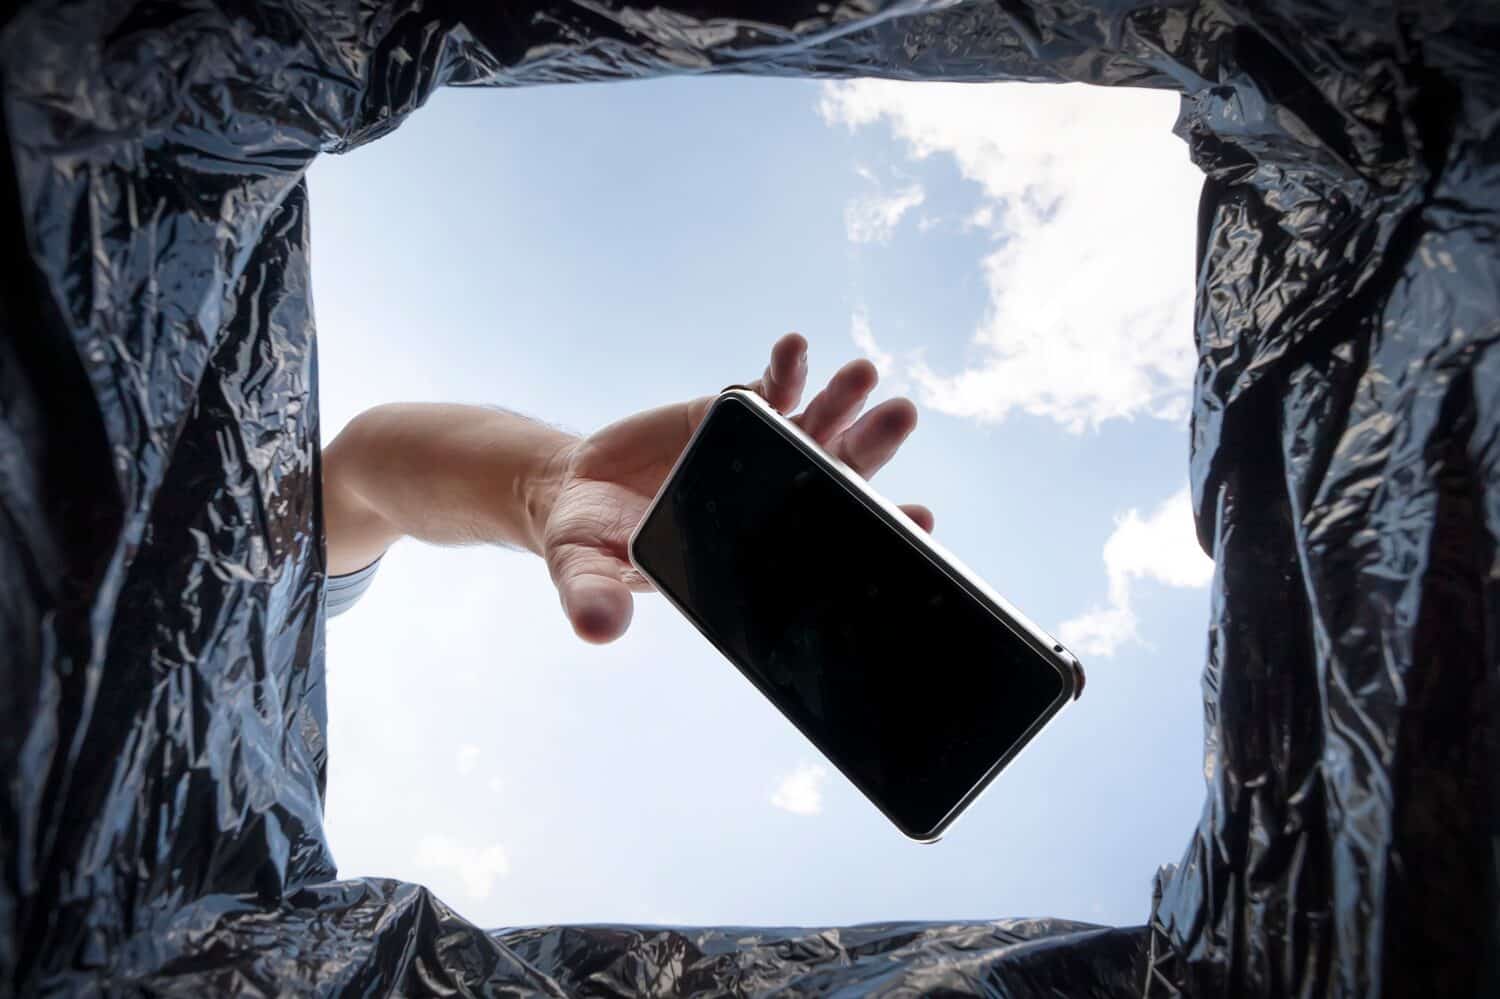 a man throws a non-working smartphone into a trash can. Bottom view from the trash can. The problem of recycling and pollution of the planet with garbage.